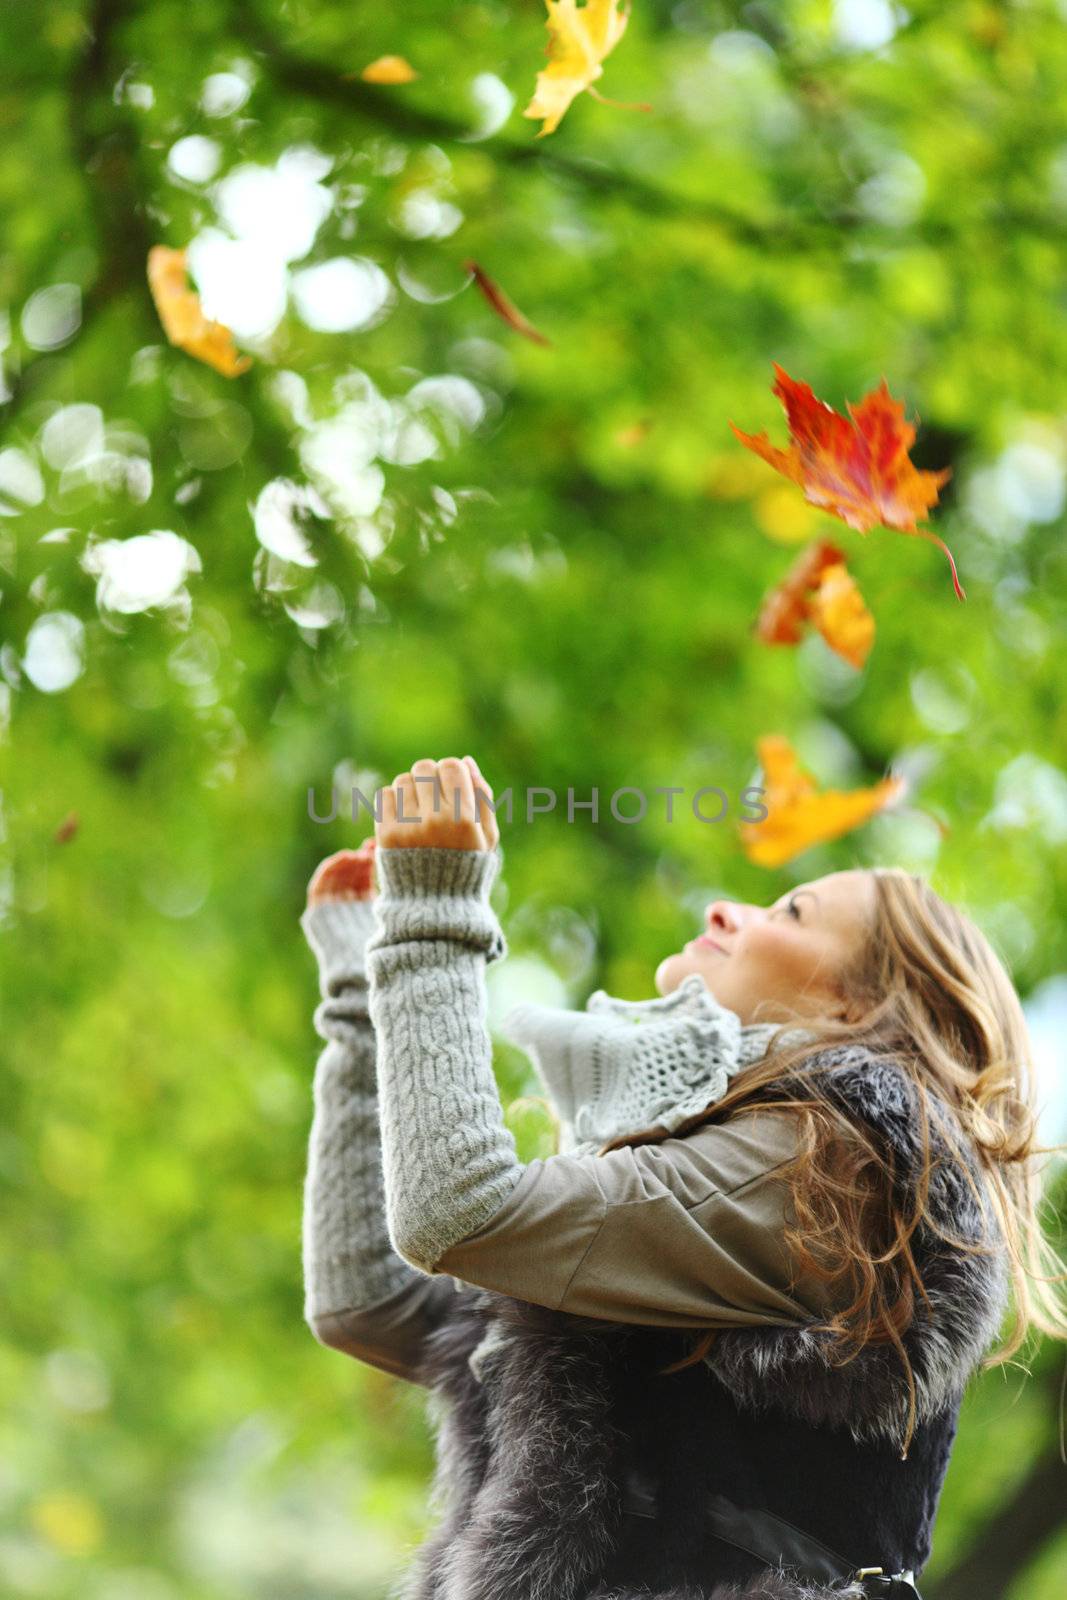 woman drop leaves in autumn park by Yellowj